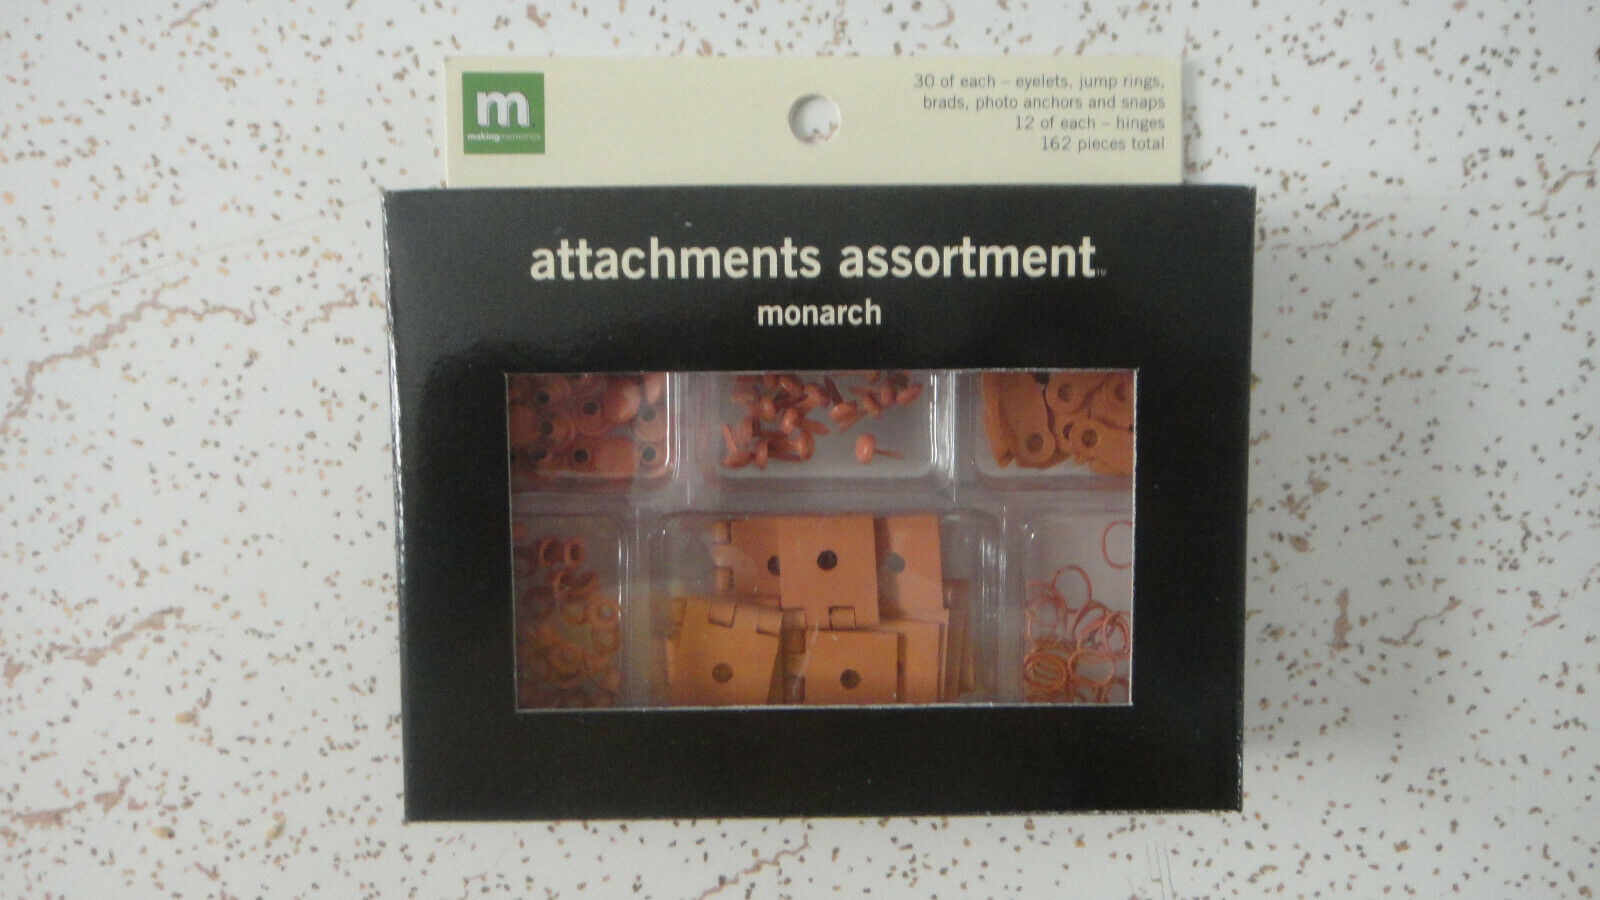 Making Memories Attachments Assortment, By Monarch. Eyelets, Jump Rings, brads+ - $7.11